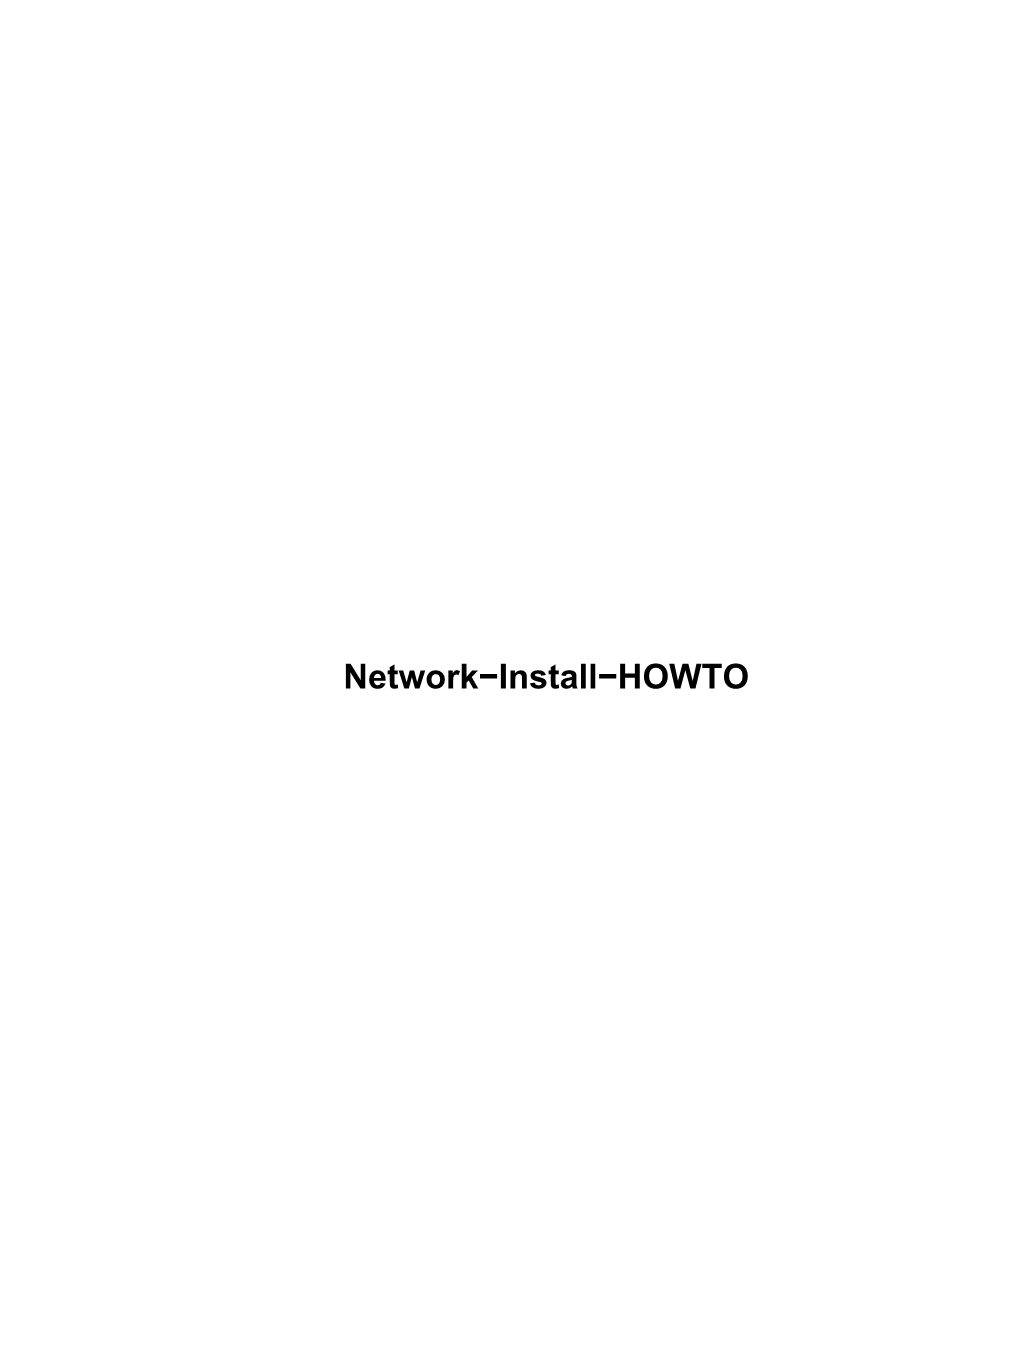 Network-Install-HOWTO